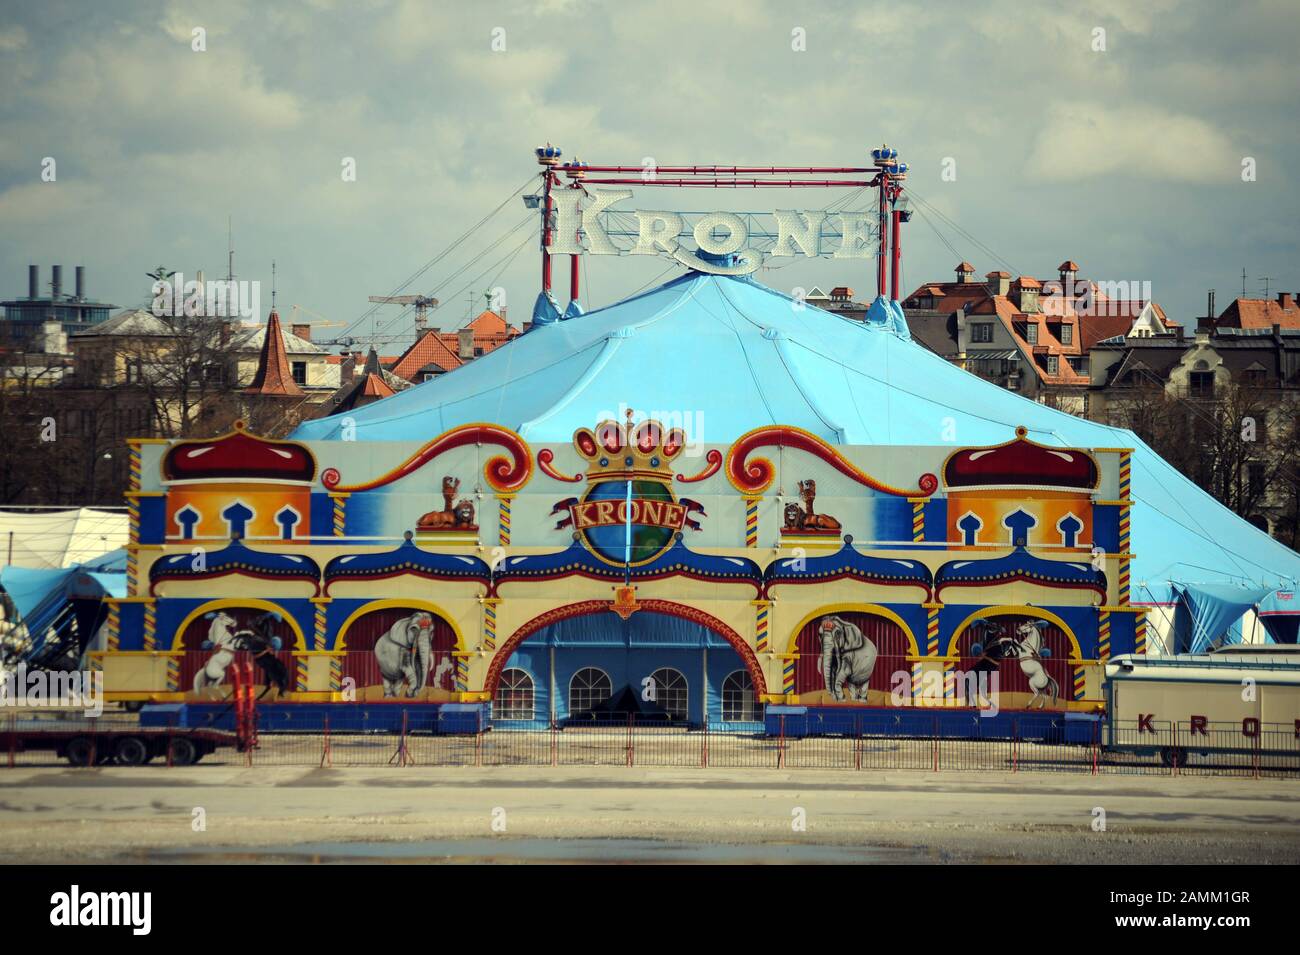 Circus Krone will be making a guest appearance with the largest circus tent in the world on Munich's Theresienwiese. In addition to the blue giant tent, the Circus Krone city also has a restaurant, a school, a company fire brigade, a team kitchen, a carpentry workshop and a saddlery. [automated translation] Stock Photo